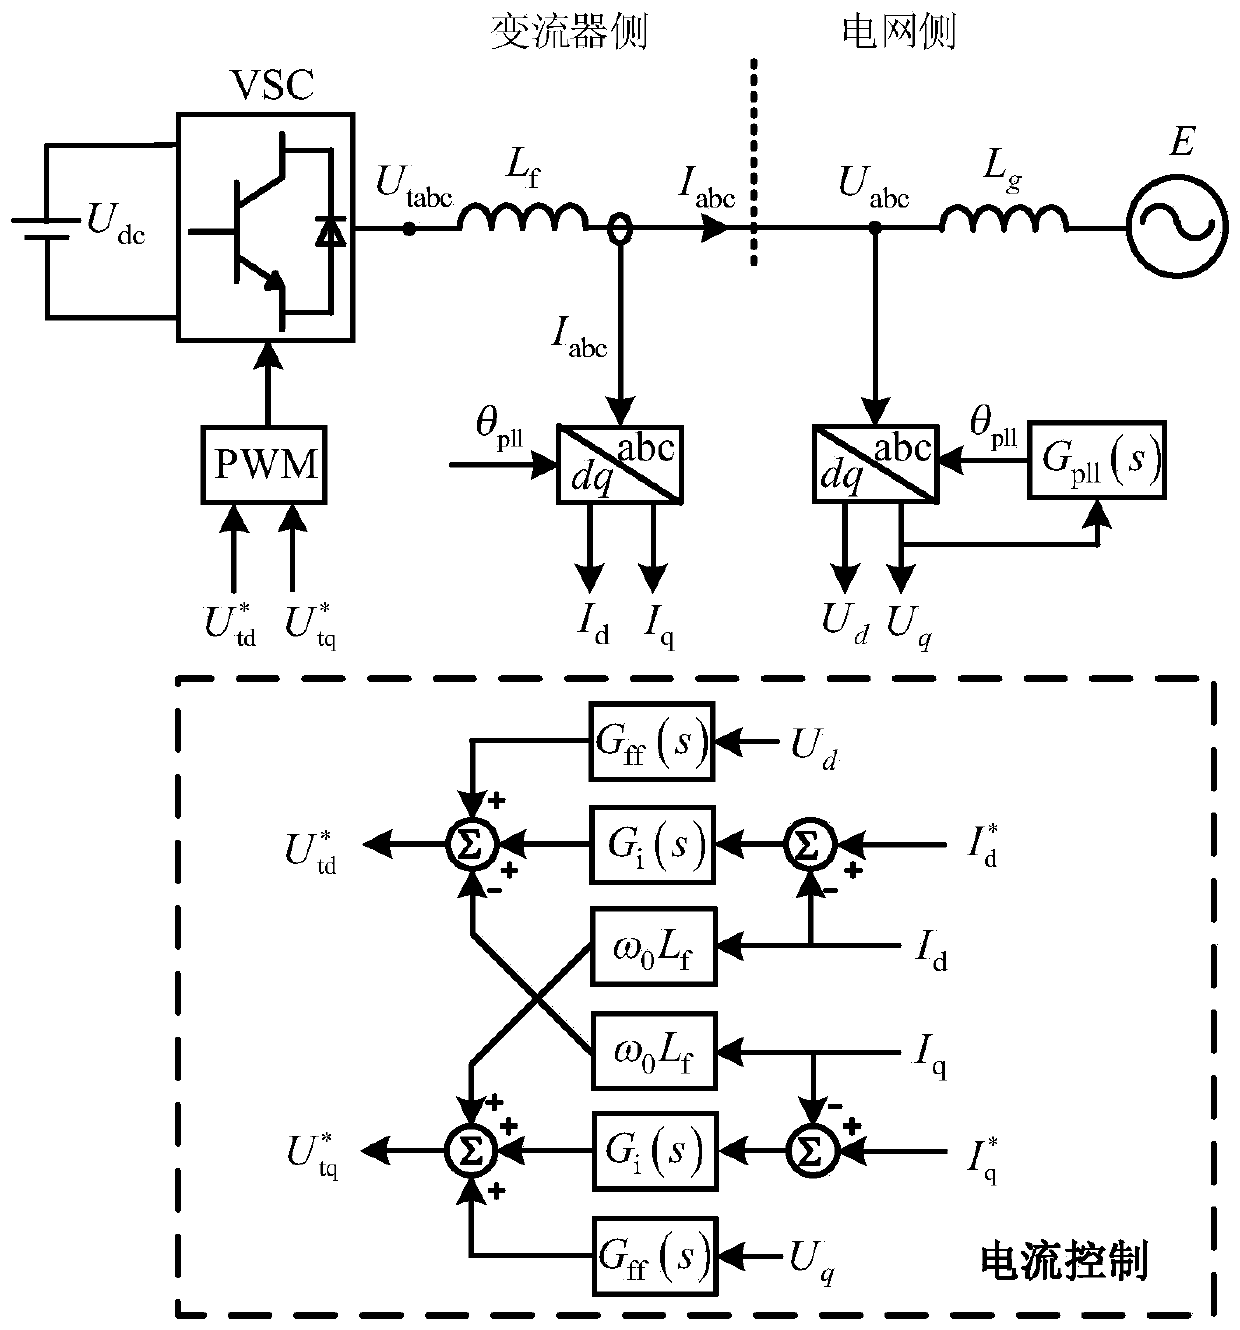 Method for judging influence of power factor on small-interference stability of converter grid-connected system